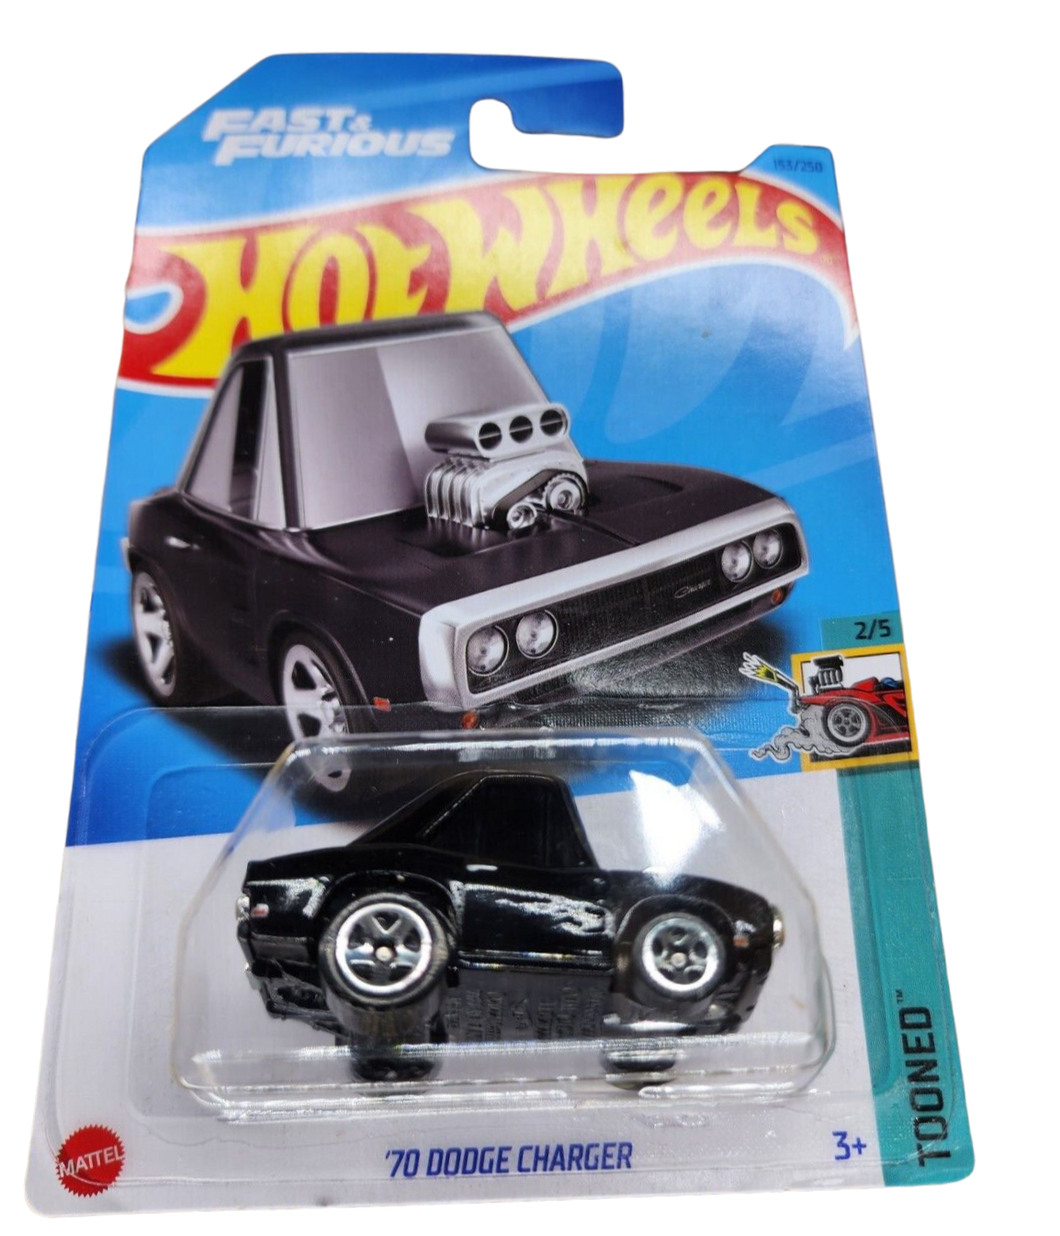 Hot Wheels '70 Dodge Charger Black Tooned 2/5 Fast & Furious 1:64 Diecast Car